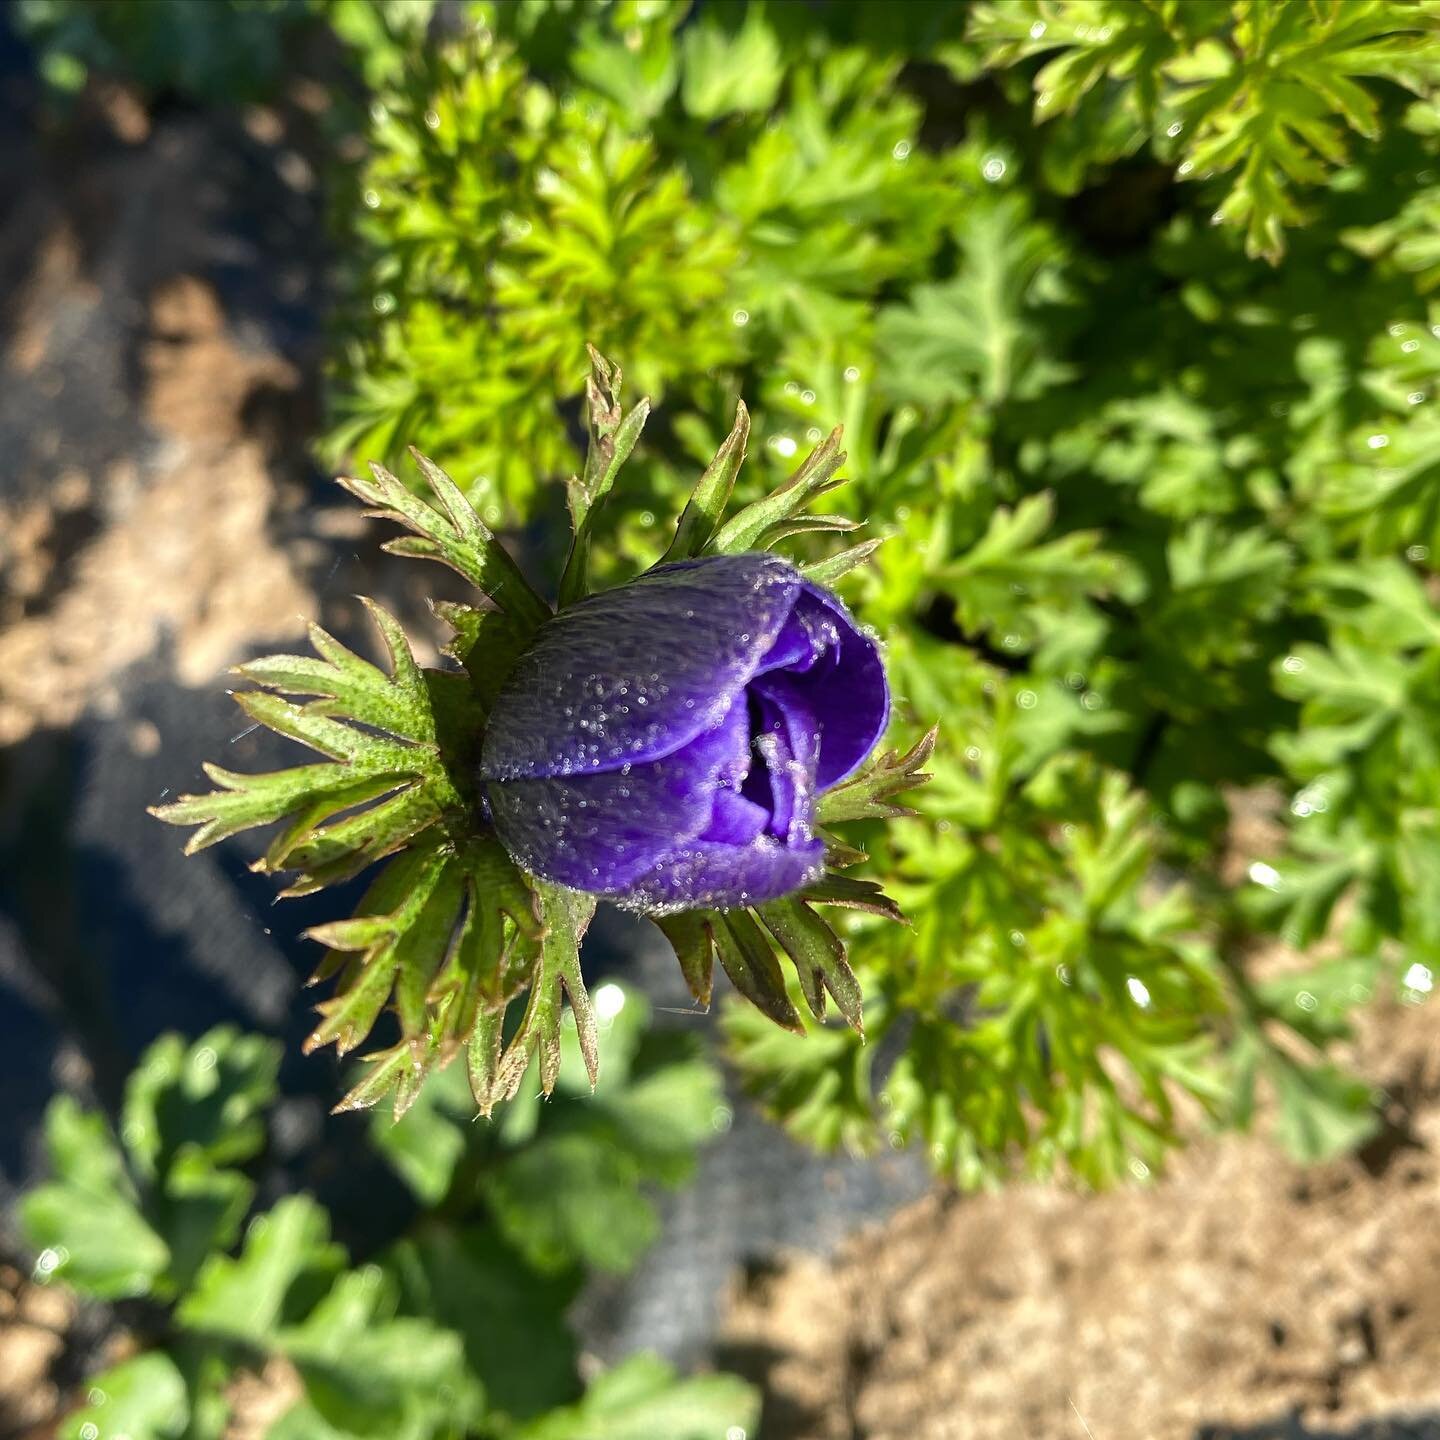 First anemone. Be still my heart, spring is on its way!